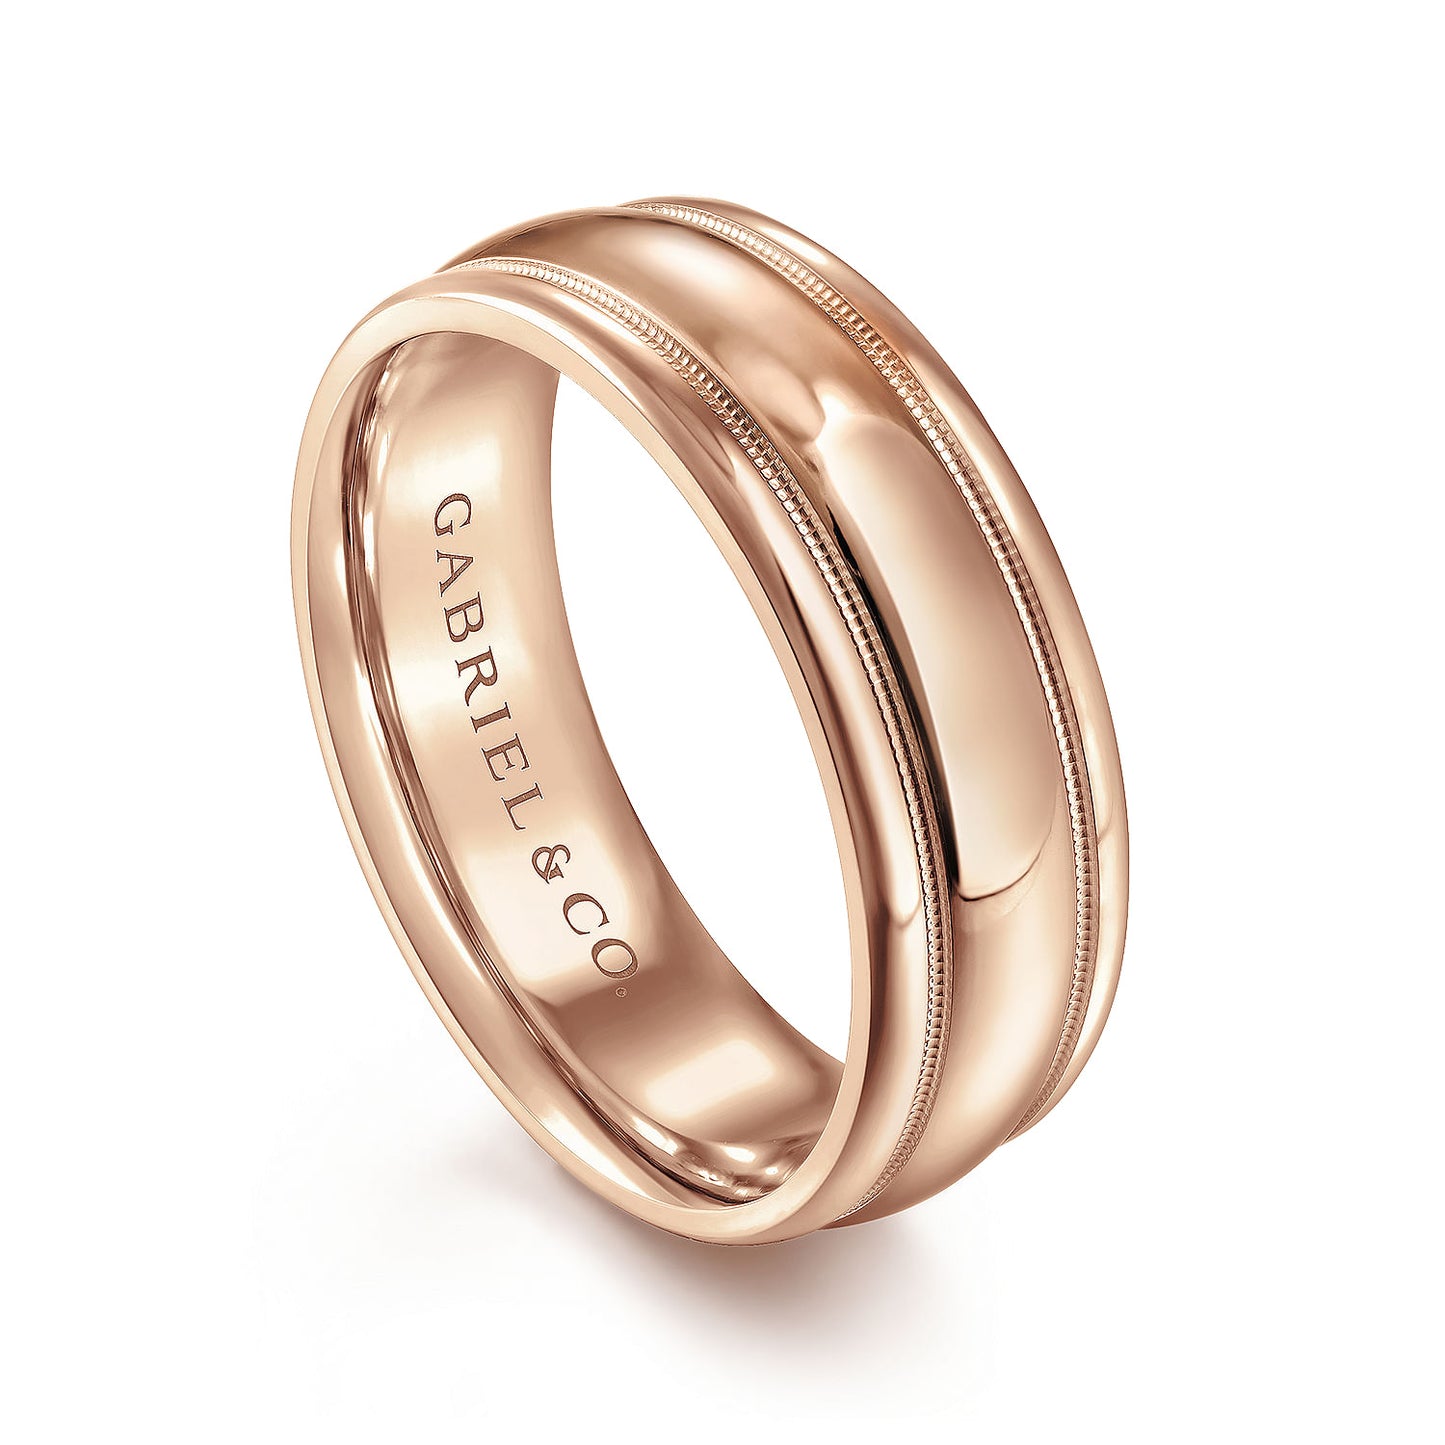 Gabriel & Co Rose Gold Wedding Band With A Raised Center And Milgrain Accents - Gold Wedding Bands - Men's